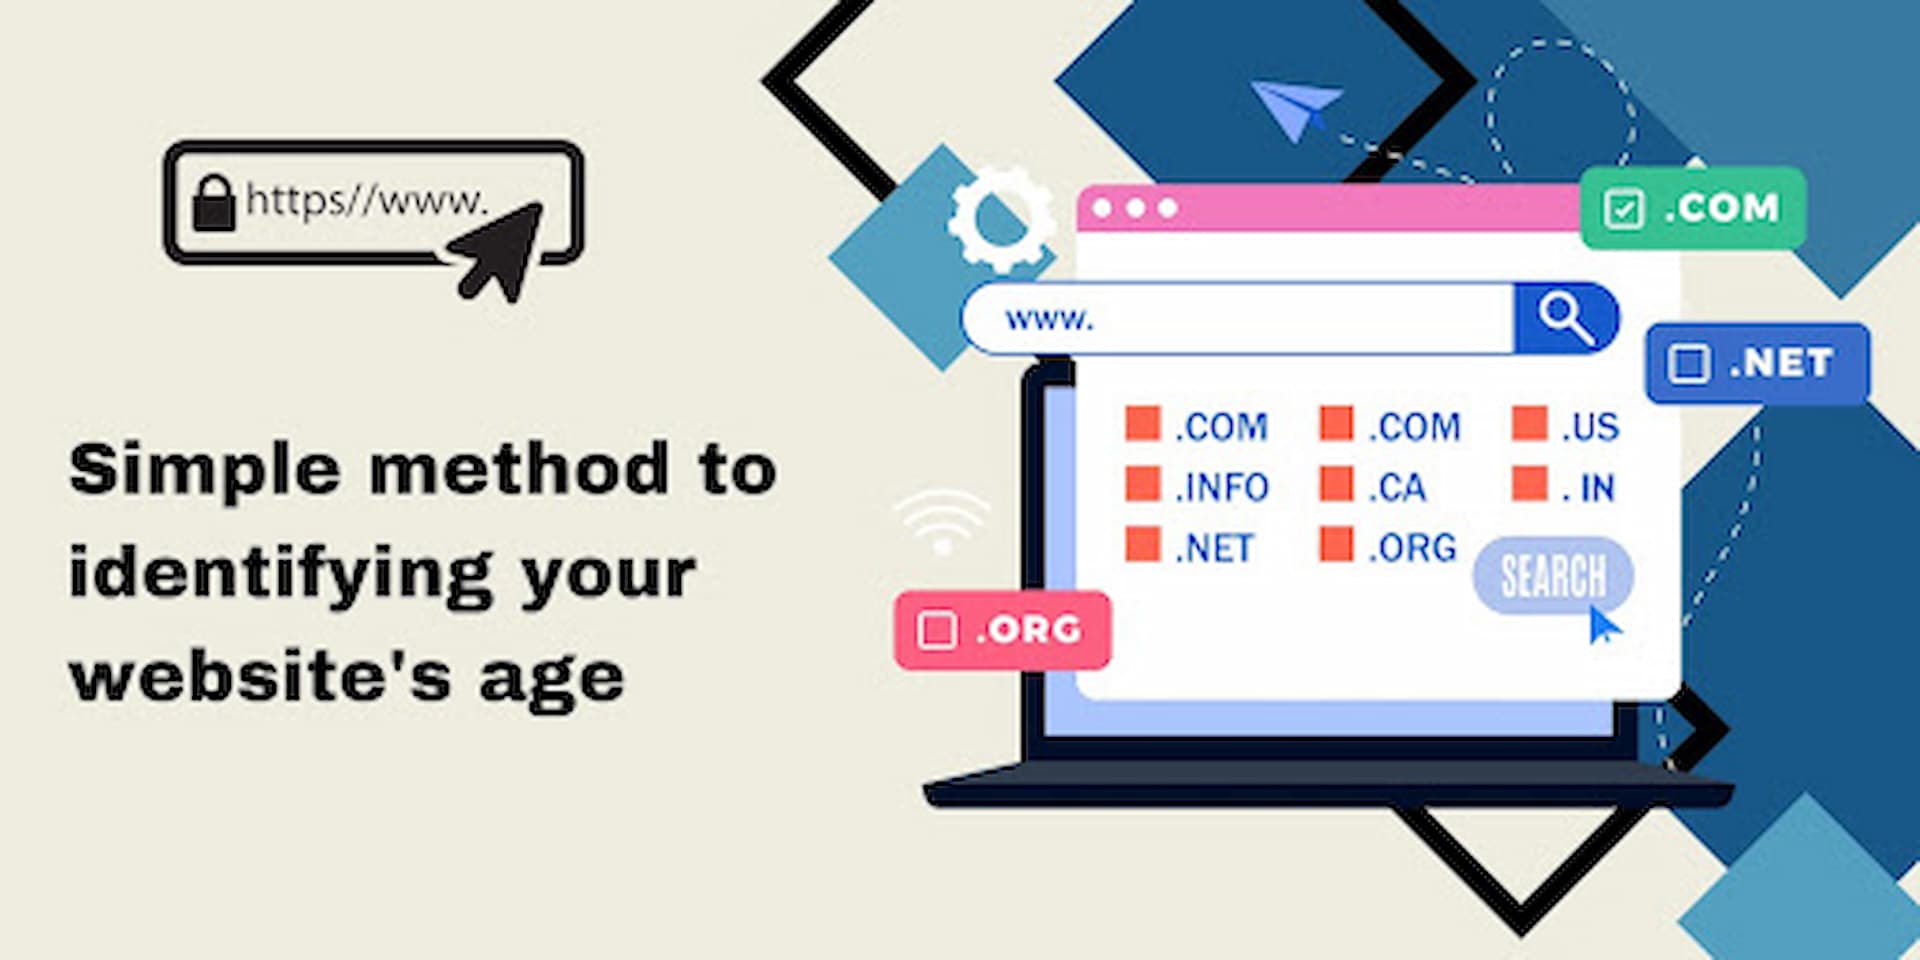 A Simple Method To Identify Your Website’s Age